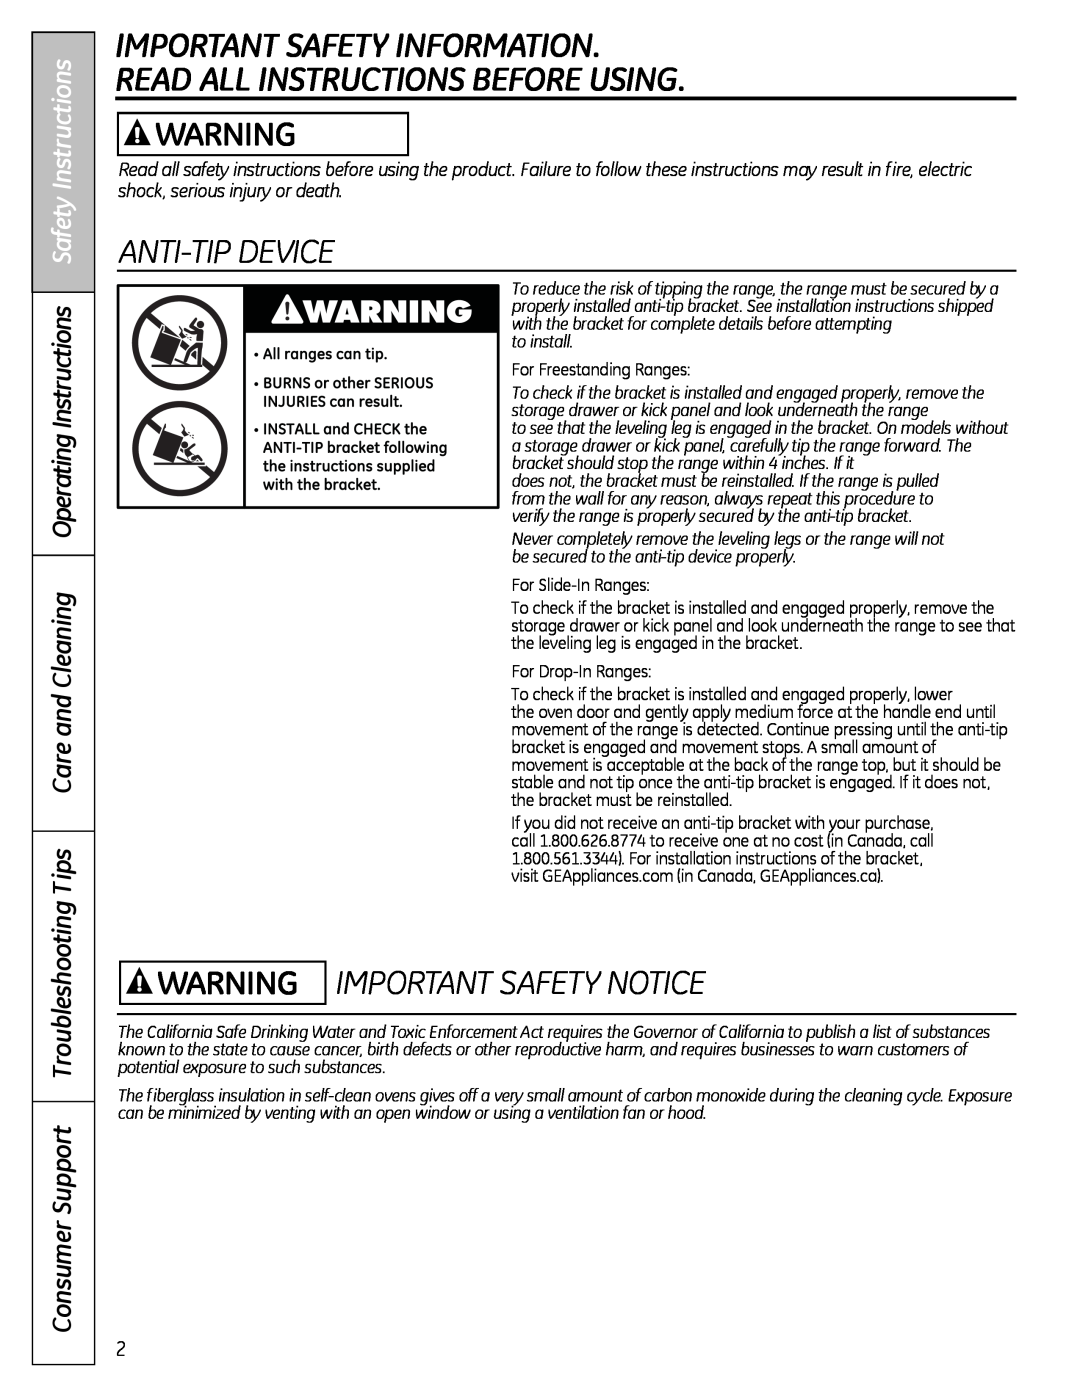 Hotpoint JBS07, JBS56, JBS27 Important Safety Information Read All Instructions Before Using, Anti-Tip Device, to install 